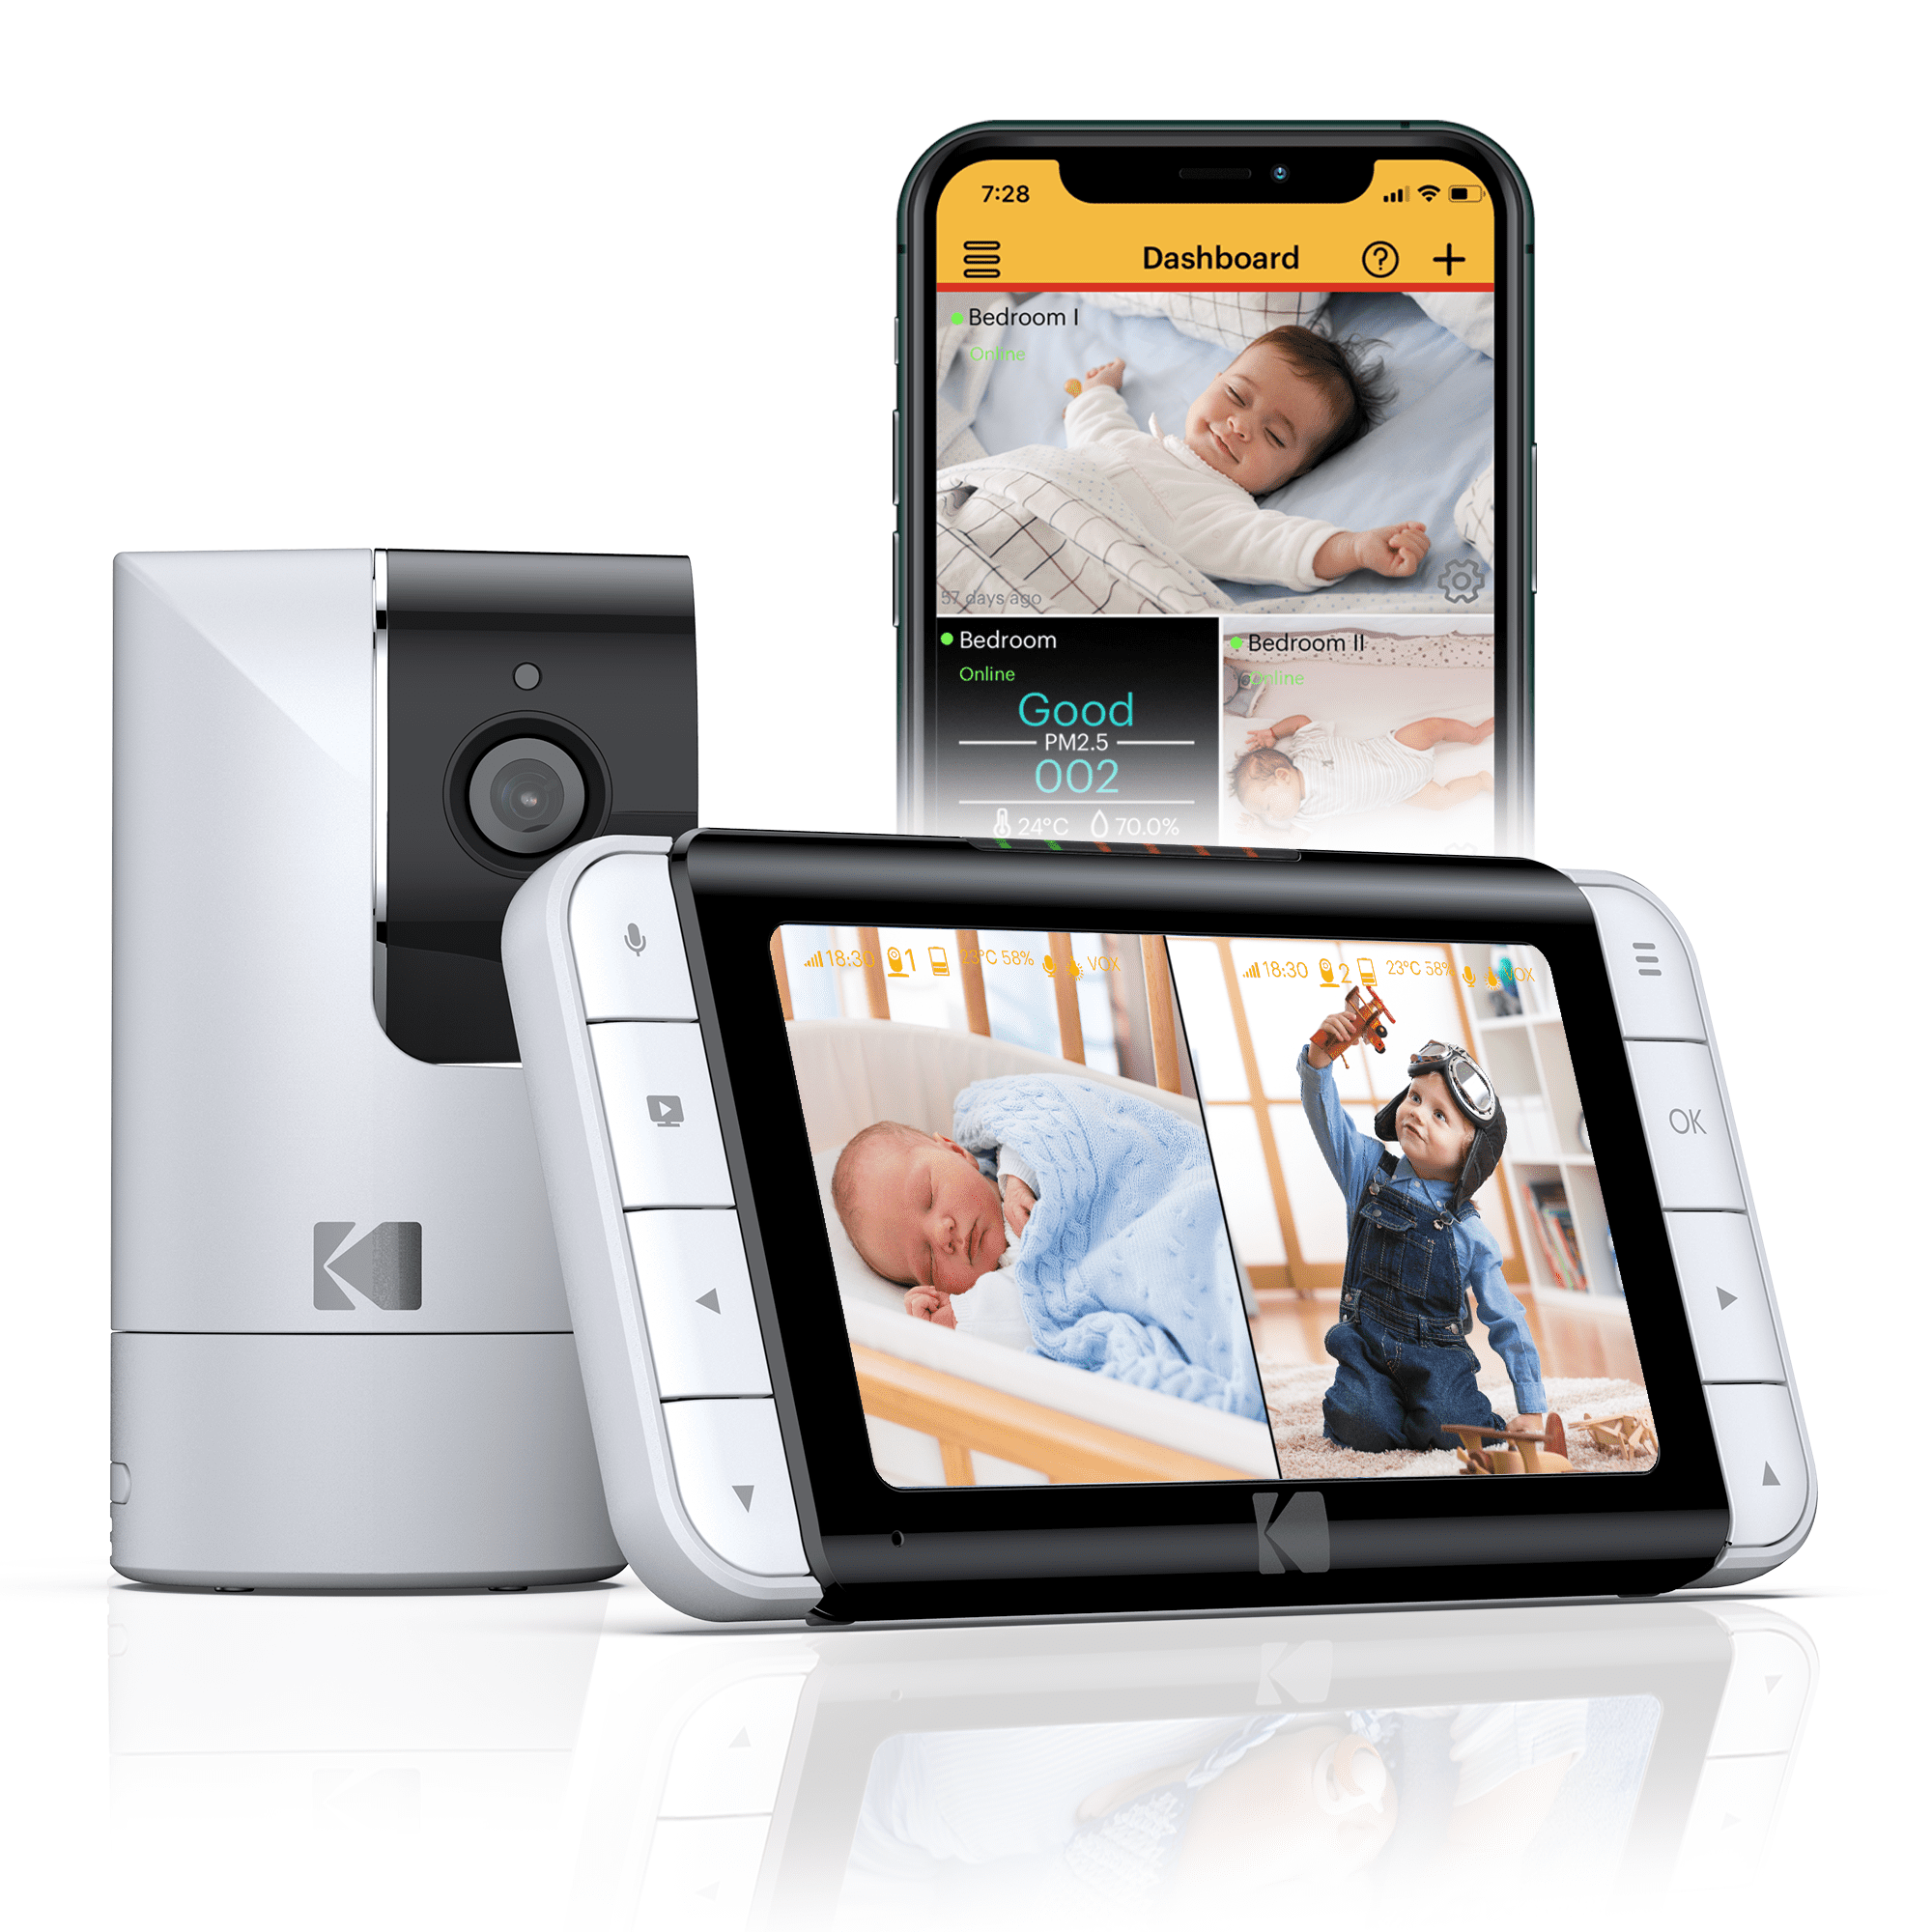 Kodak C525 WiFi Video Baby Monitor with Full Room View, Parent Unit for